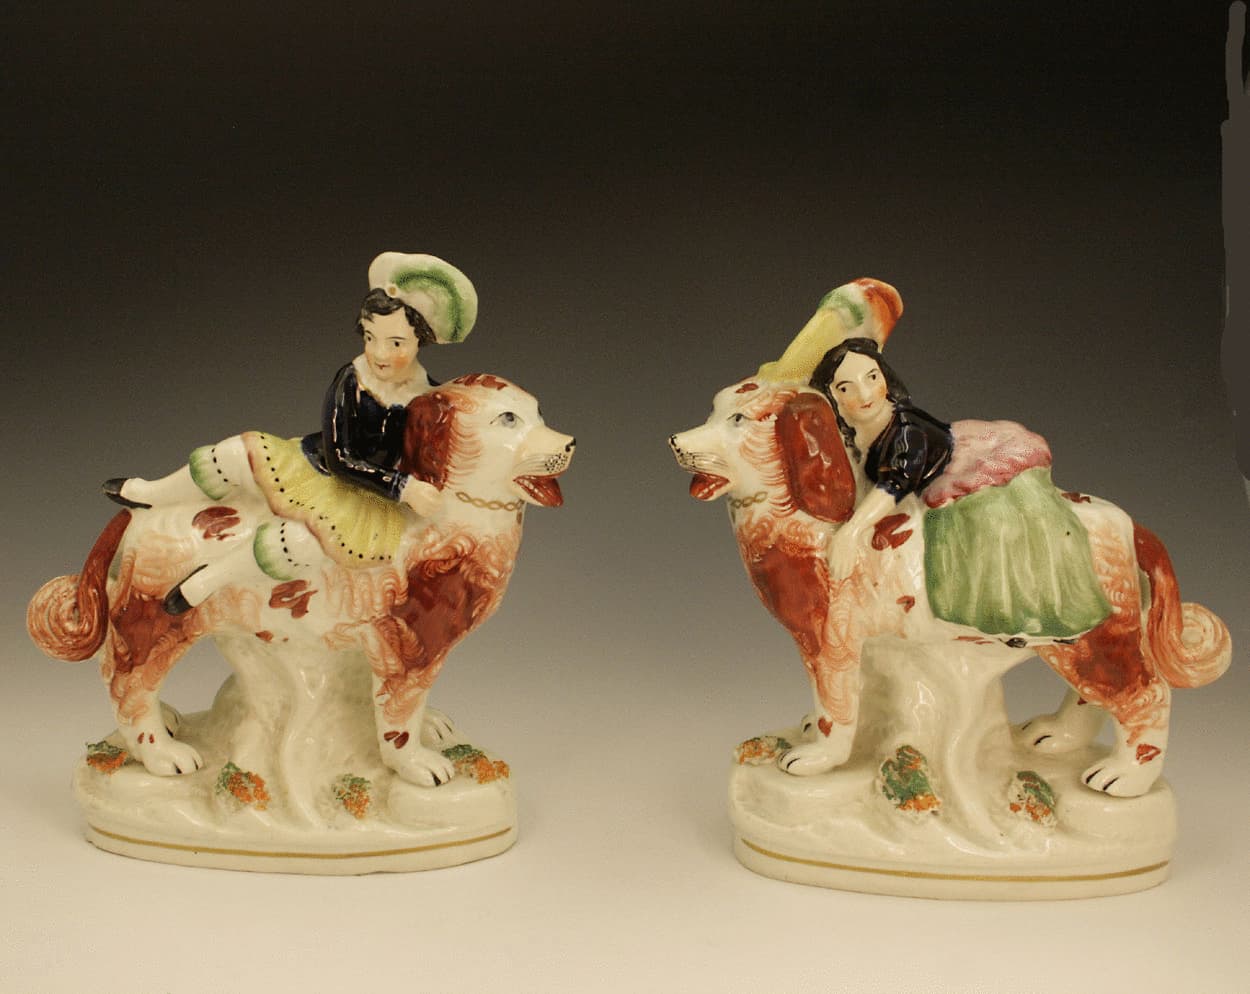 Staffordshire pottery figures of Children riding Dogs - John Howard